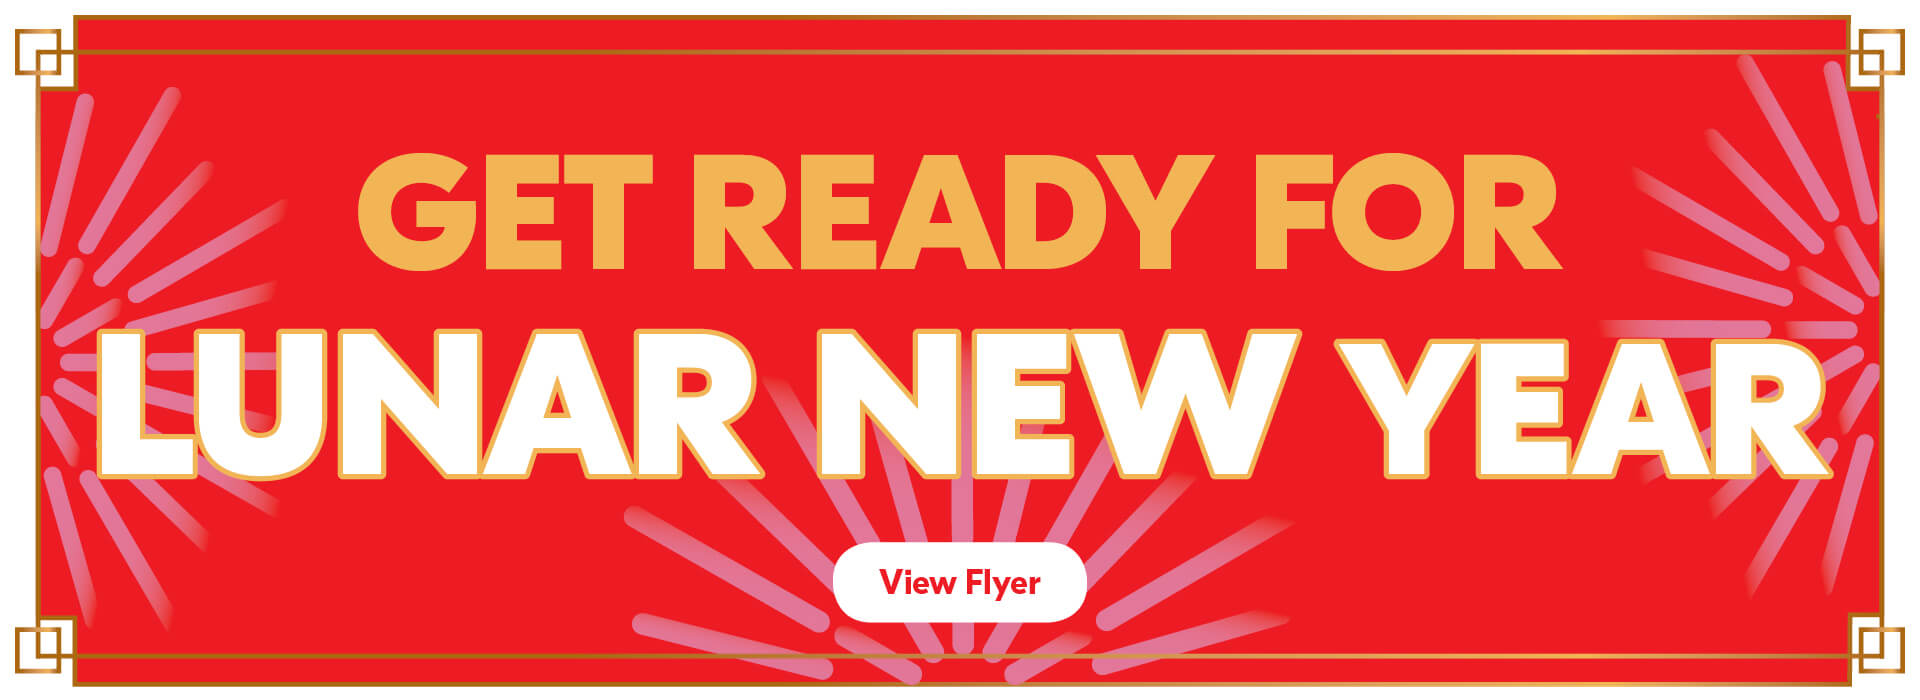 Text Reading 'Get ready for Lunar New Year' with a 'View flyer' button below.